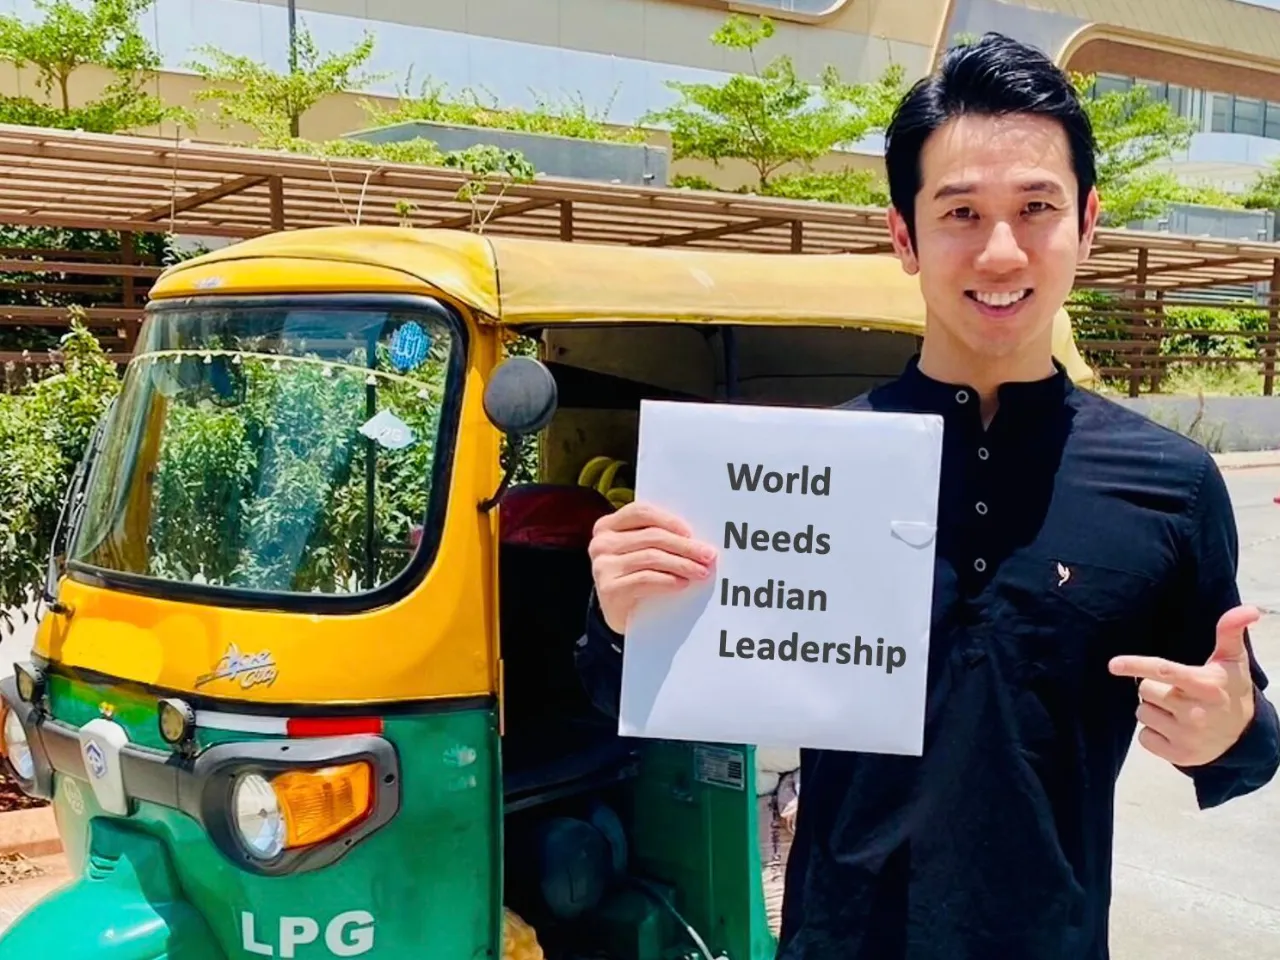 Japanese firm CEO relocates to Bengaluru to understand the culture, says 'World needs Indian leadership'